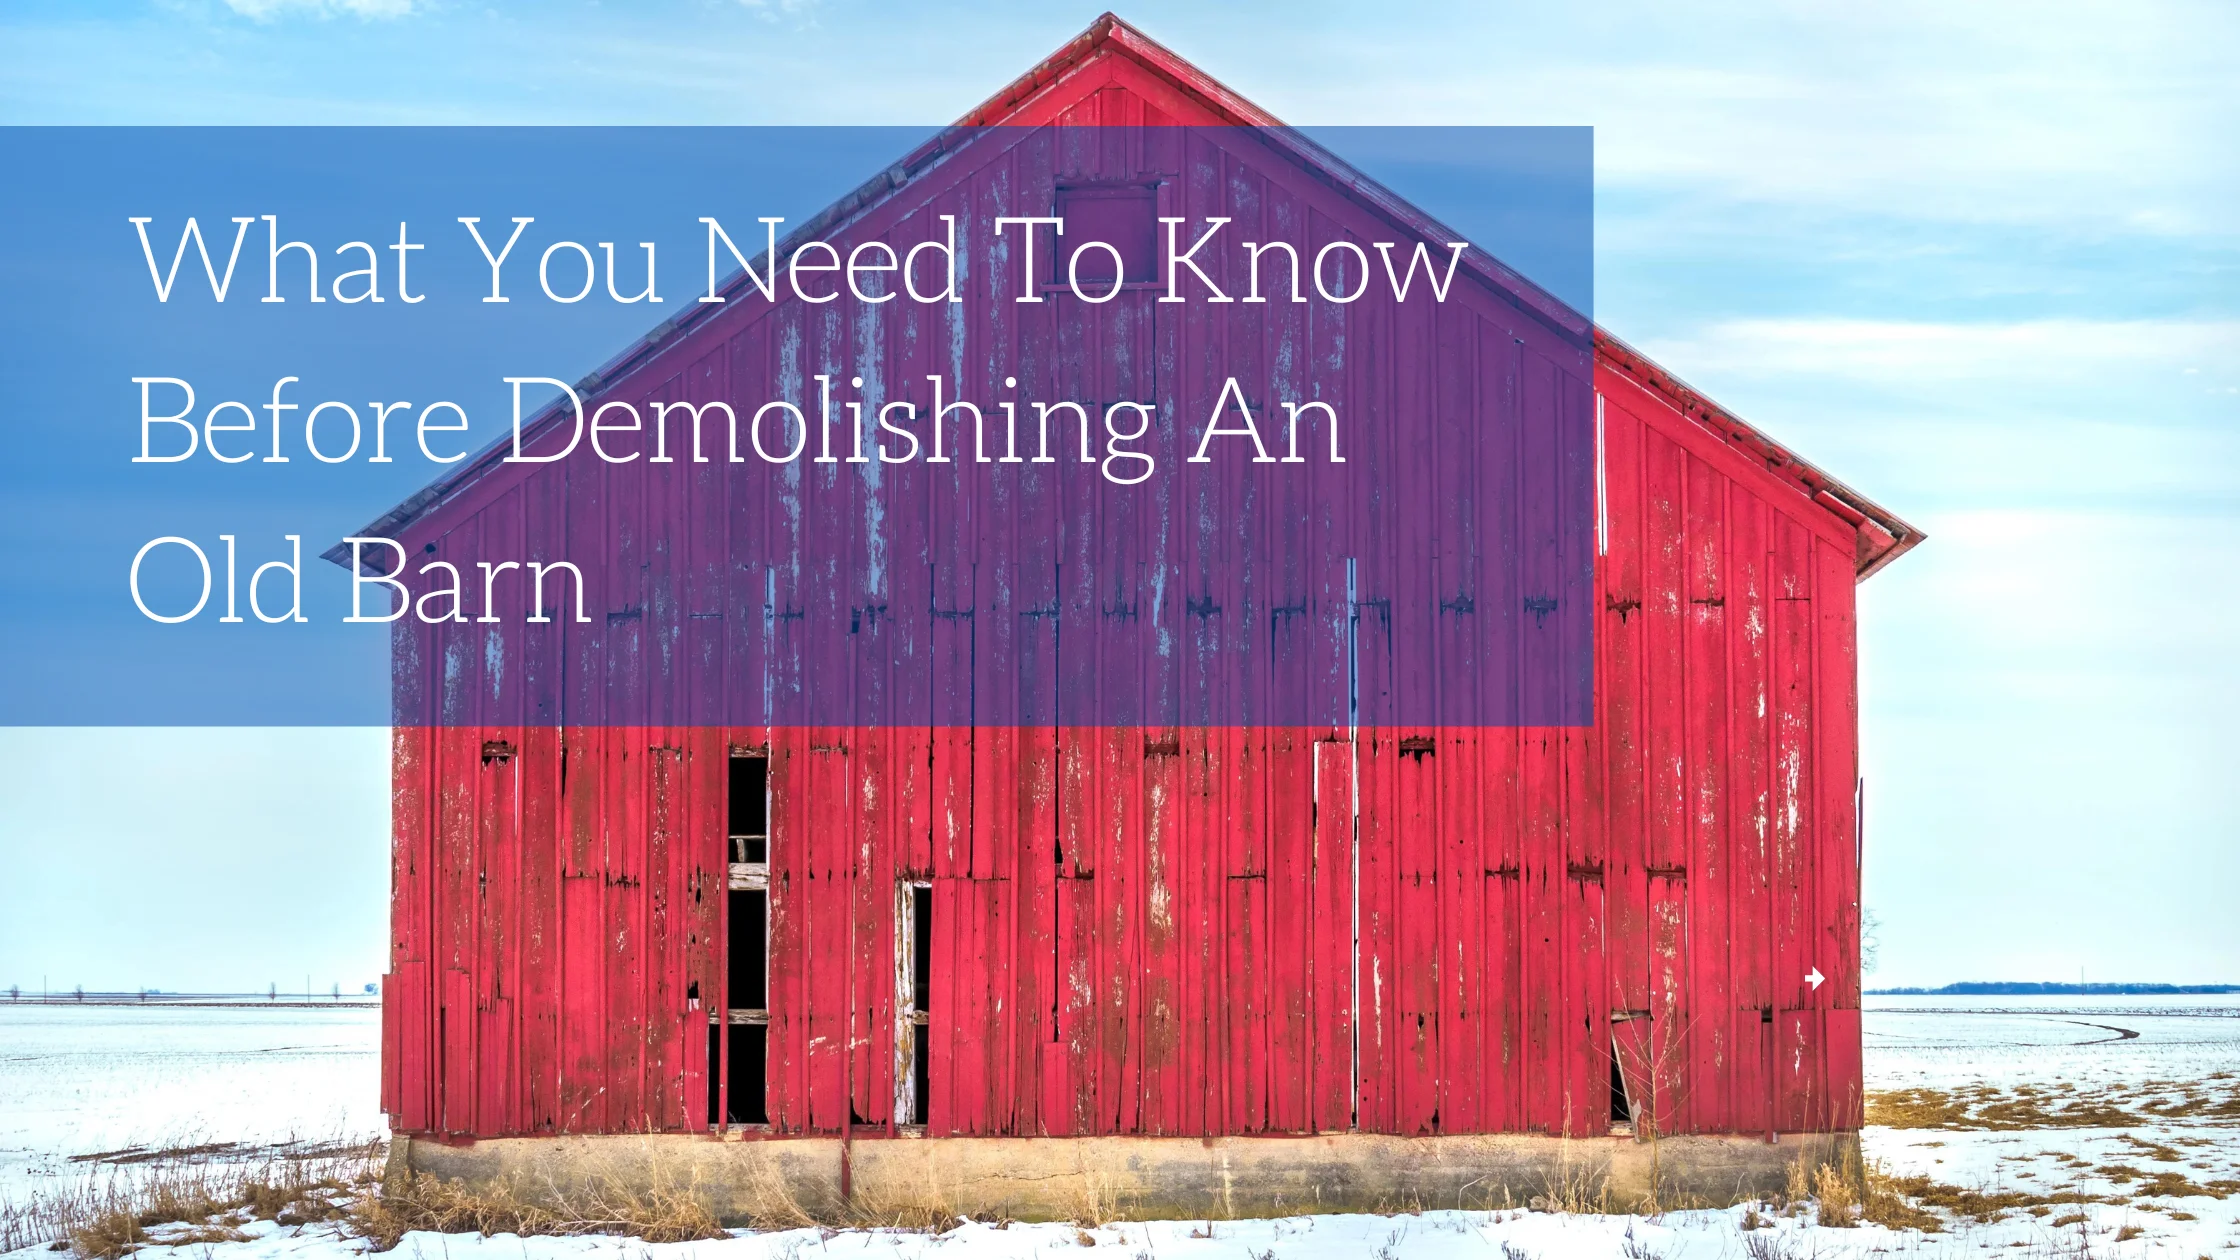 What You Need To Know Before Demolishing An Old Barn